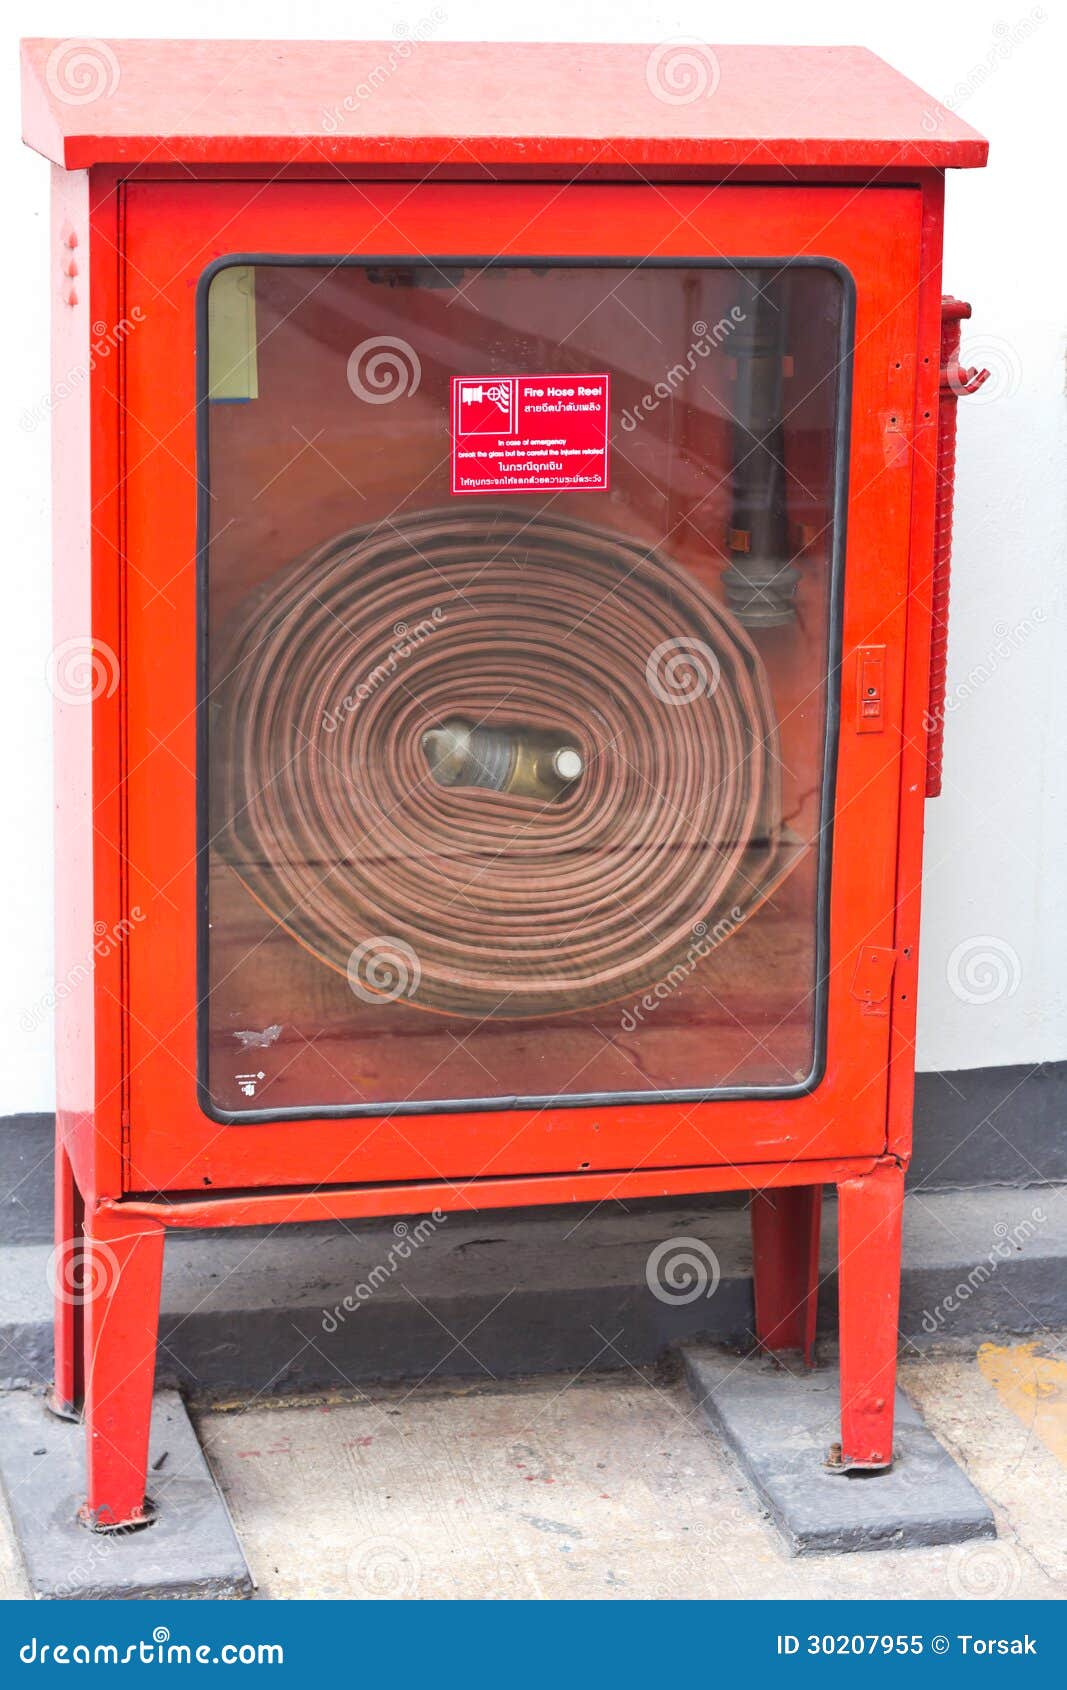 Fire hose in the box stock image. Image of hydrant, outfit - 30207955